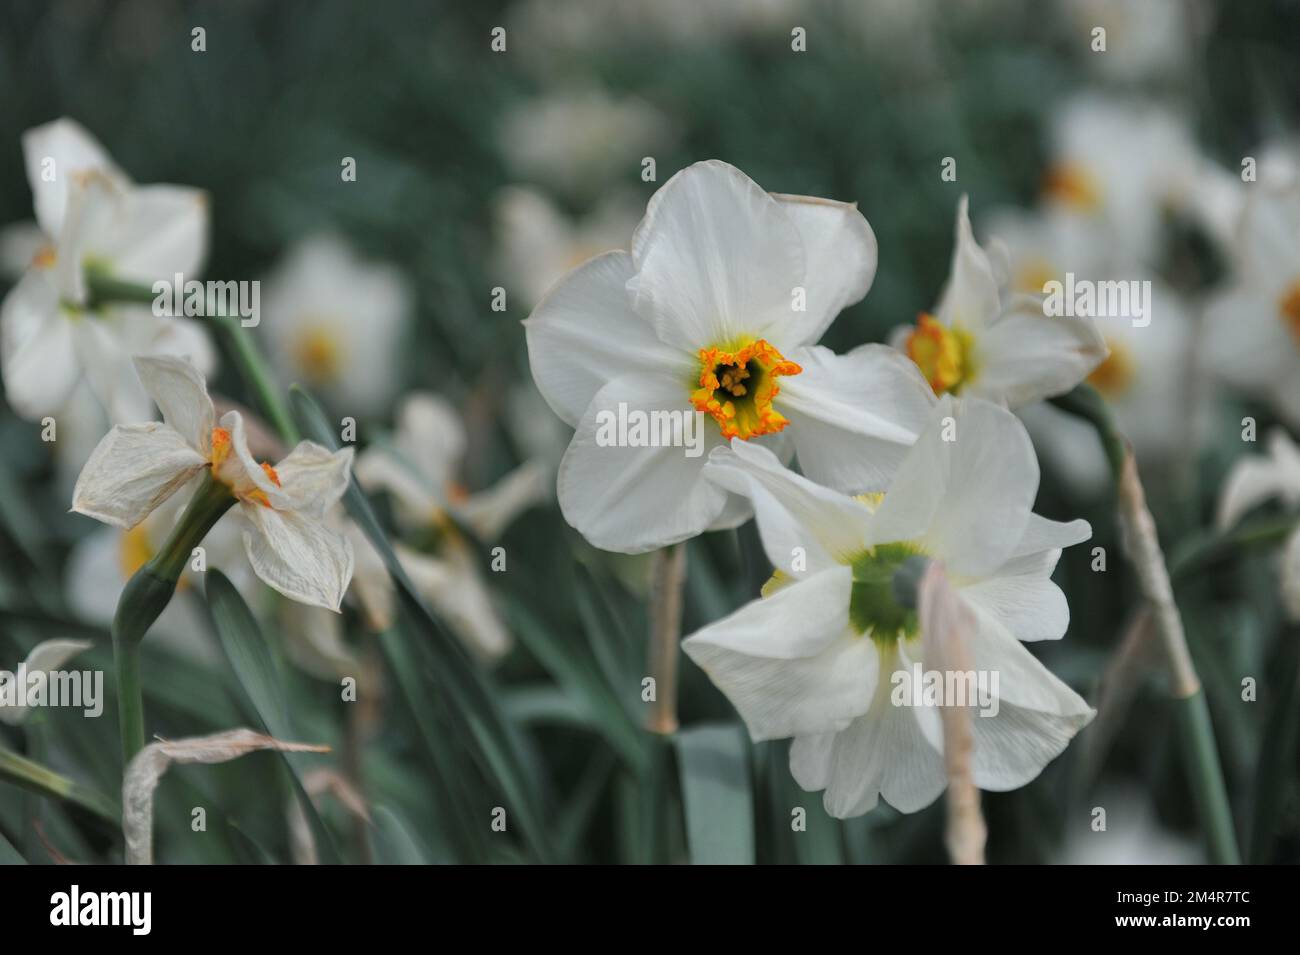 White and yellow Small-Cupped daffodils (Narcissus) Lancaster bloom in a garden in April Stock Photo